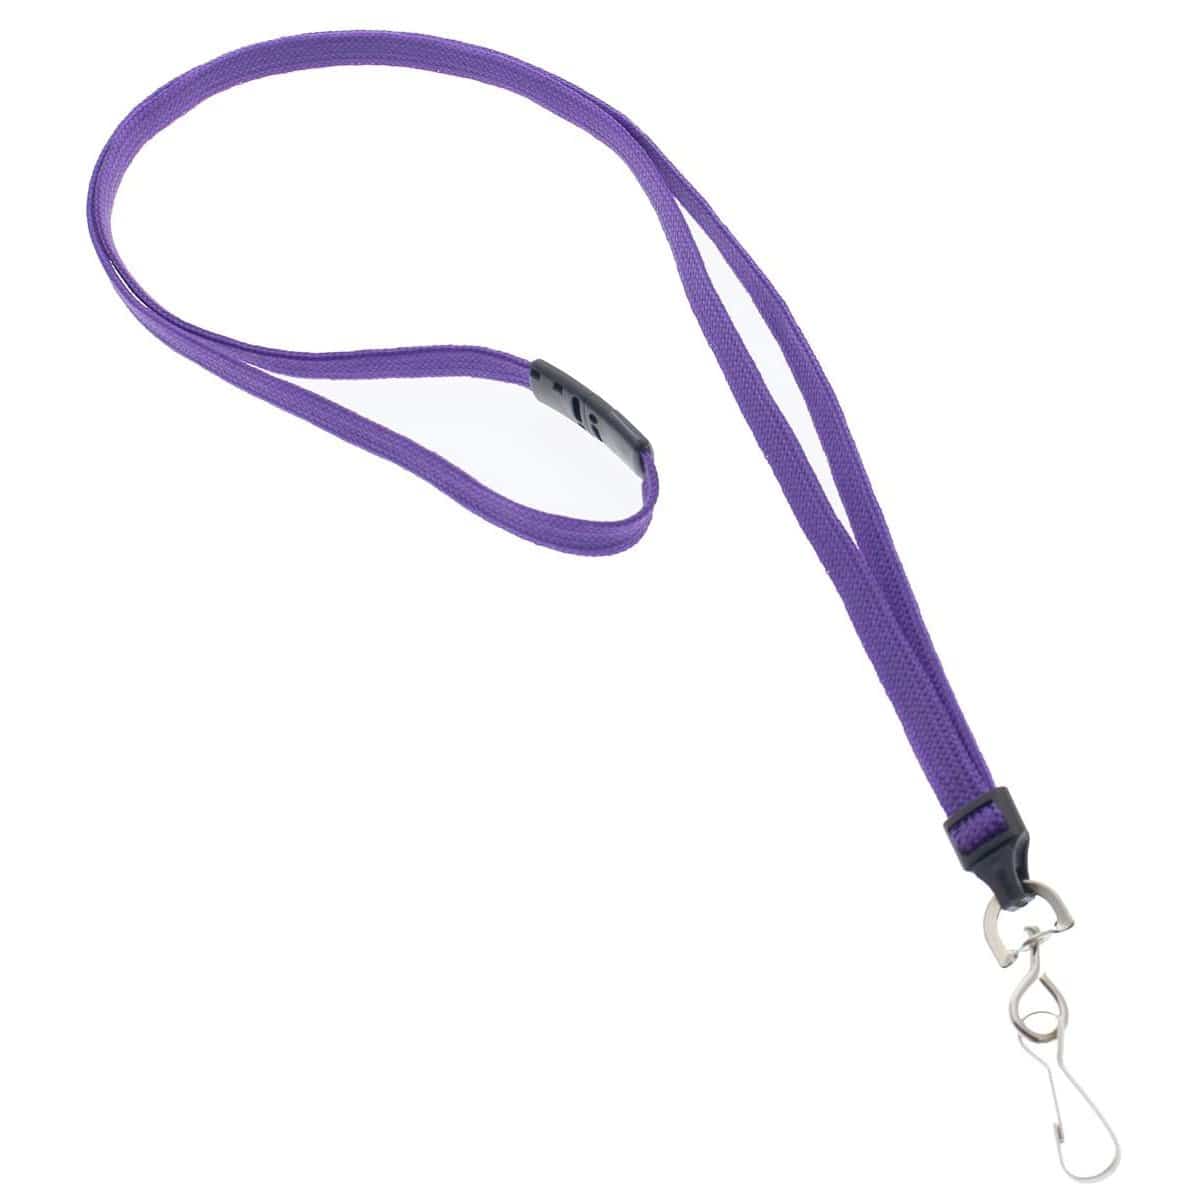 SICURIX Flat Metal Hook Lanyard - 100 / Pack - 0.4 Width x 36 Length -  Blue - ICC Business Products